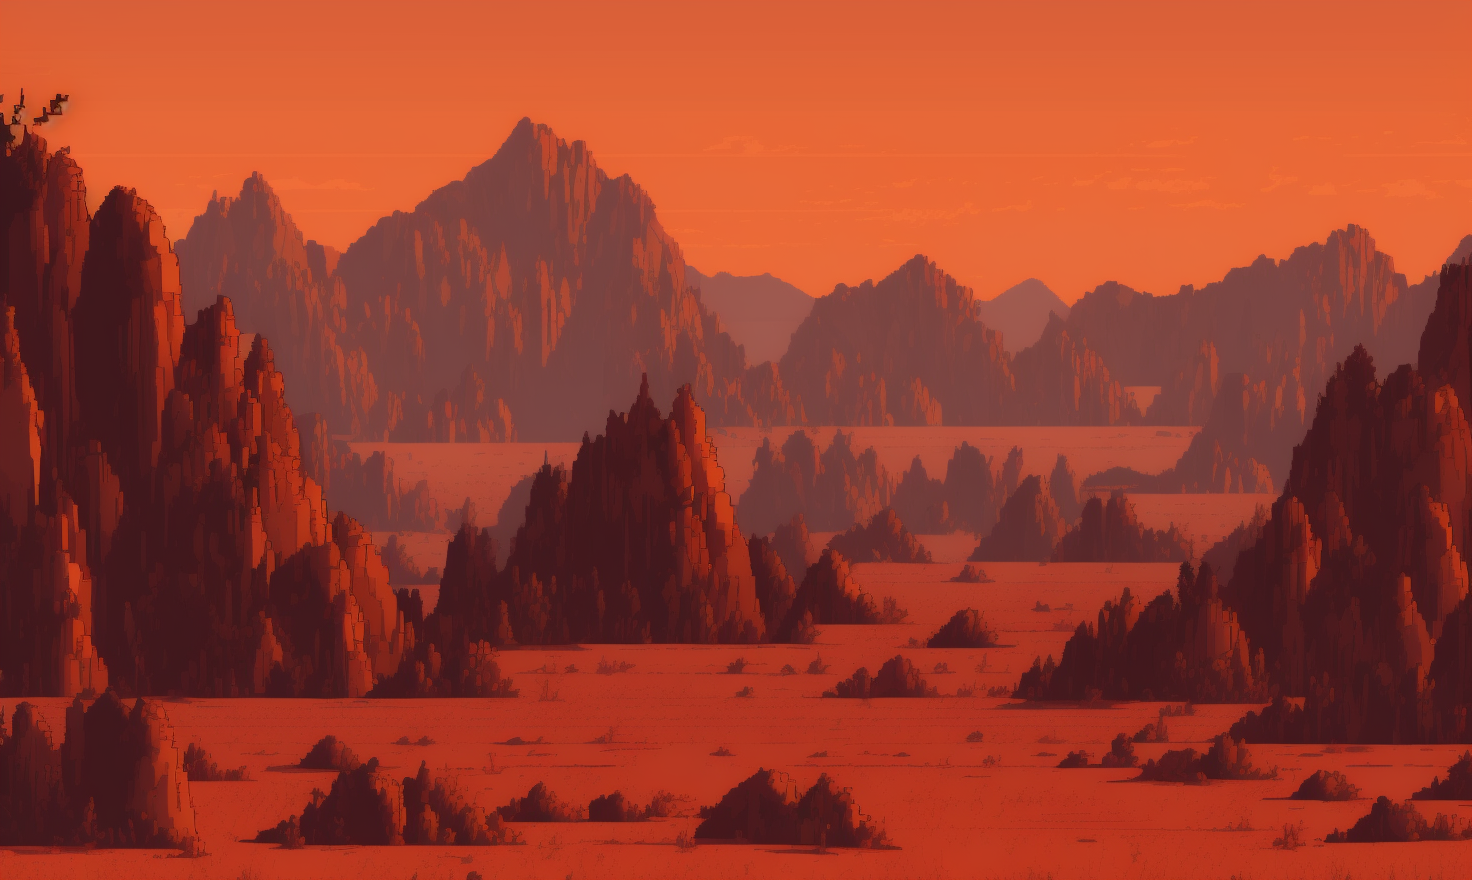 pixelart  Produce an image of a vast and arid desert wasteland, with towering sand dunes, burning heat, and the feeling of...